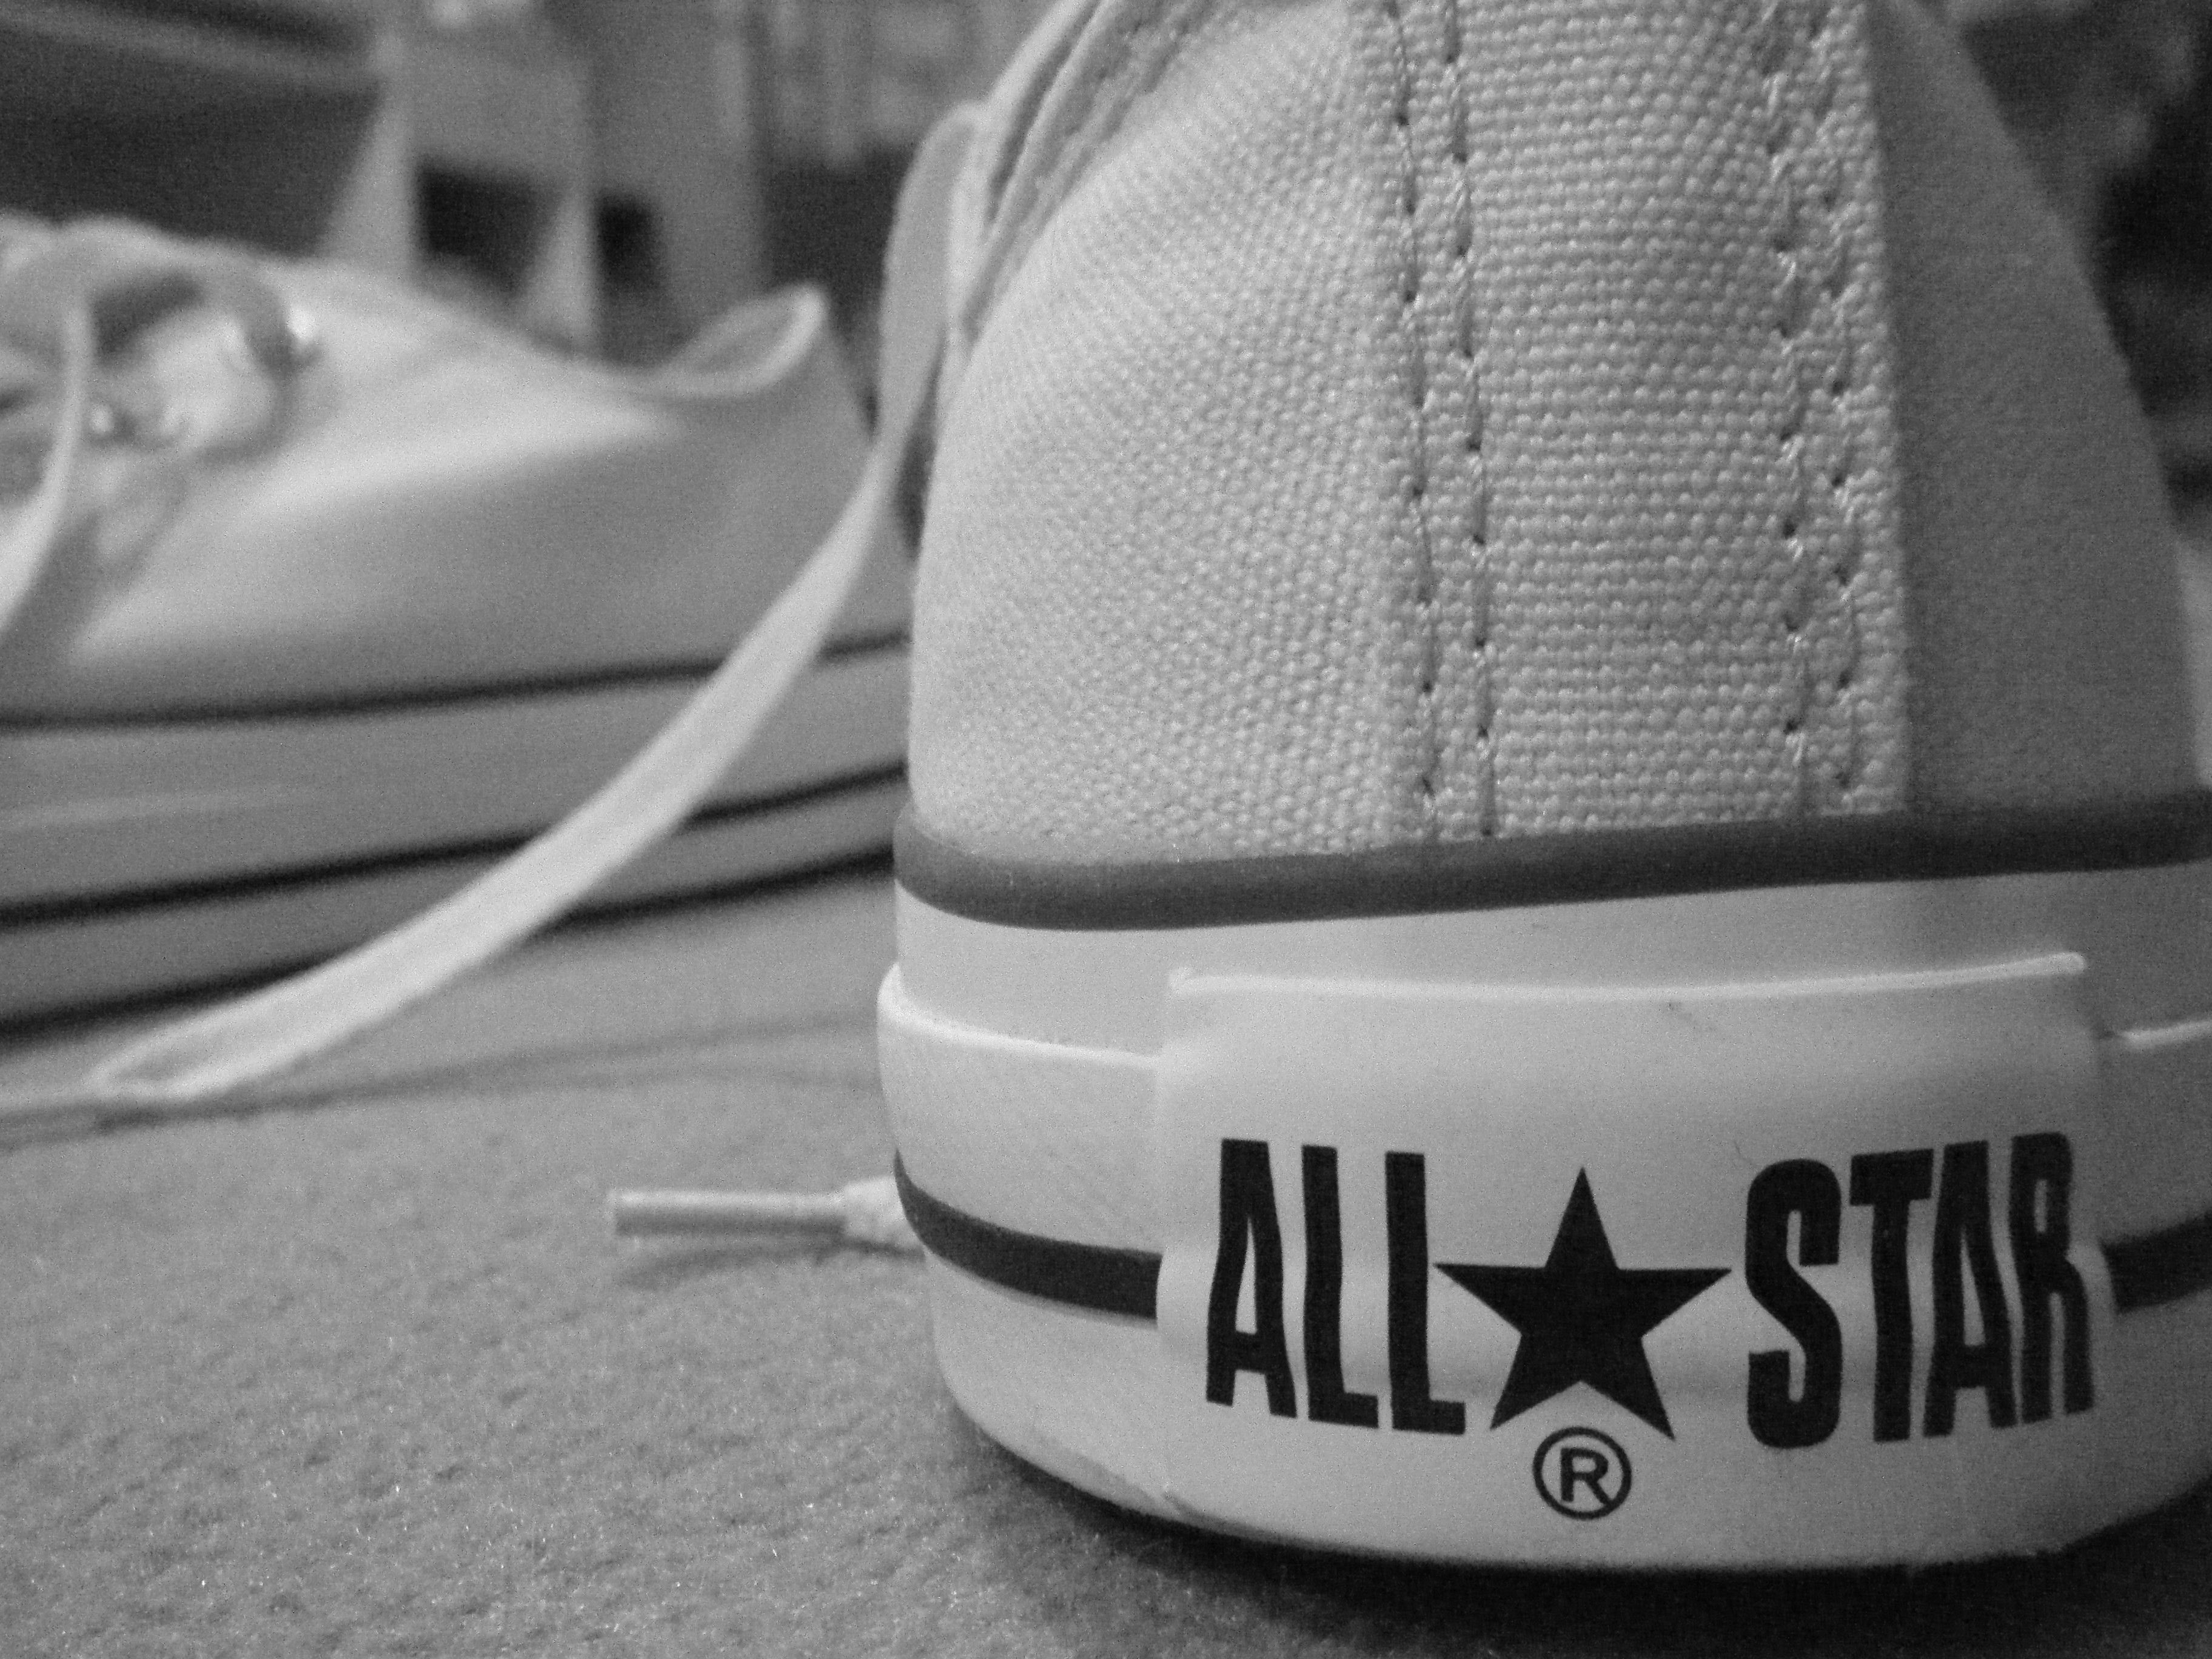 Converse All Star Shoes Wallpapers - Wallpaper Cave